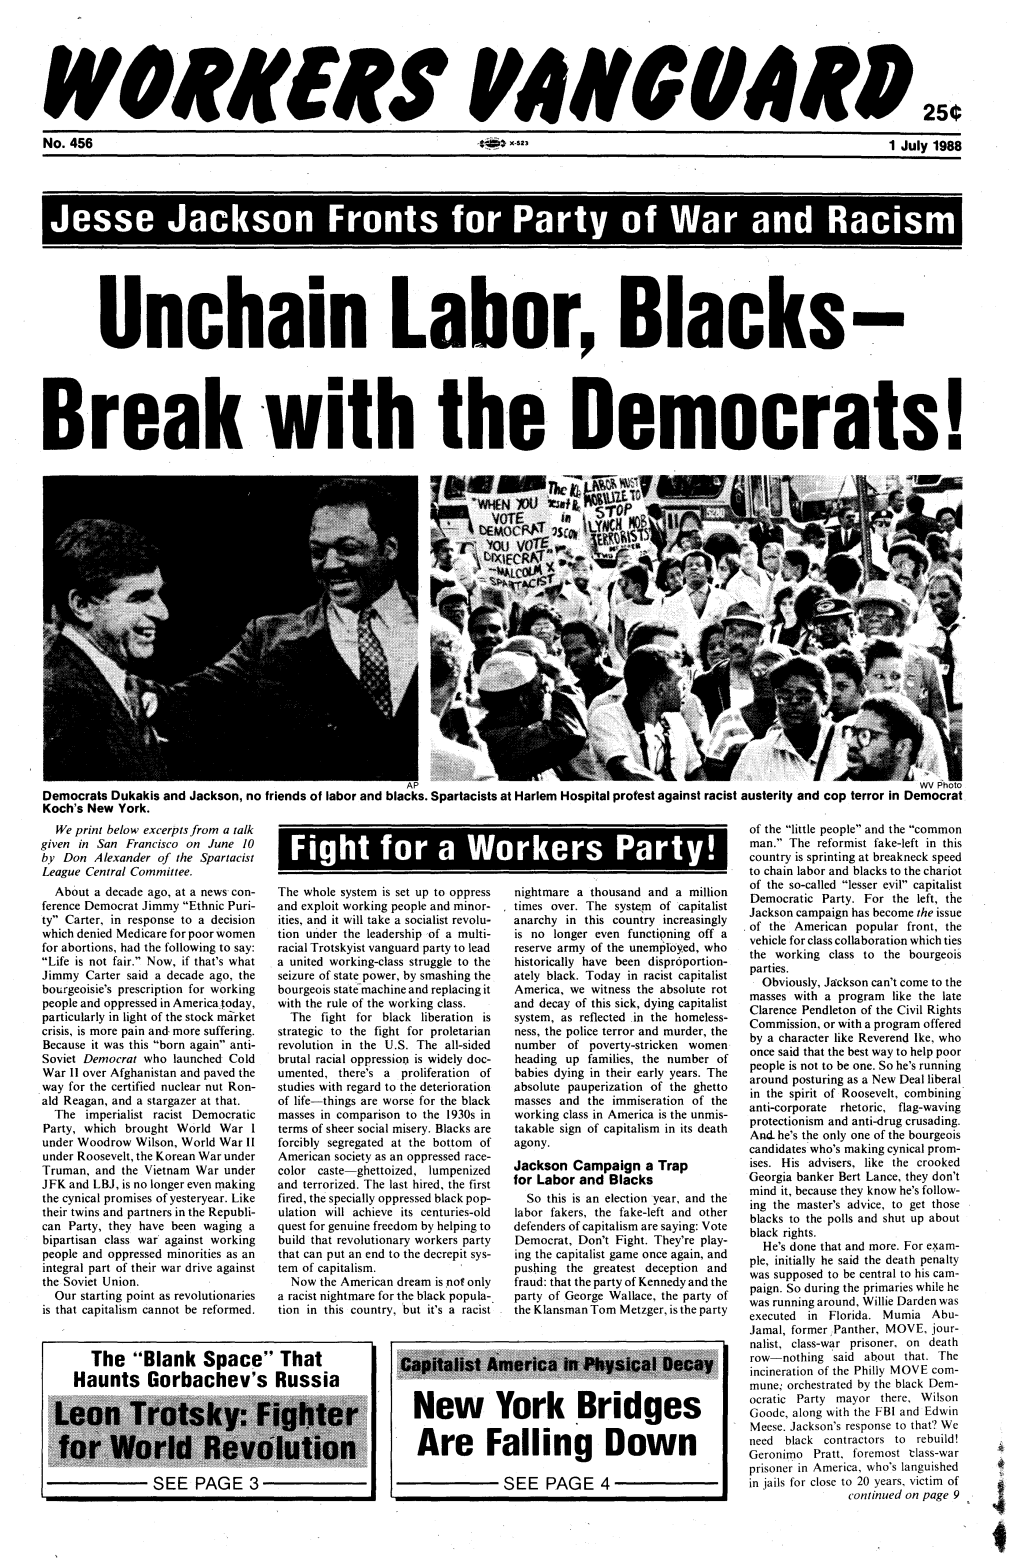 Jesse Jackson Fronts for Party of War and Racism Unchain Labor, Blacks Break 'With the Democratsl